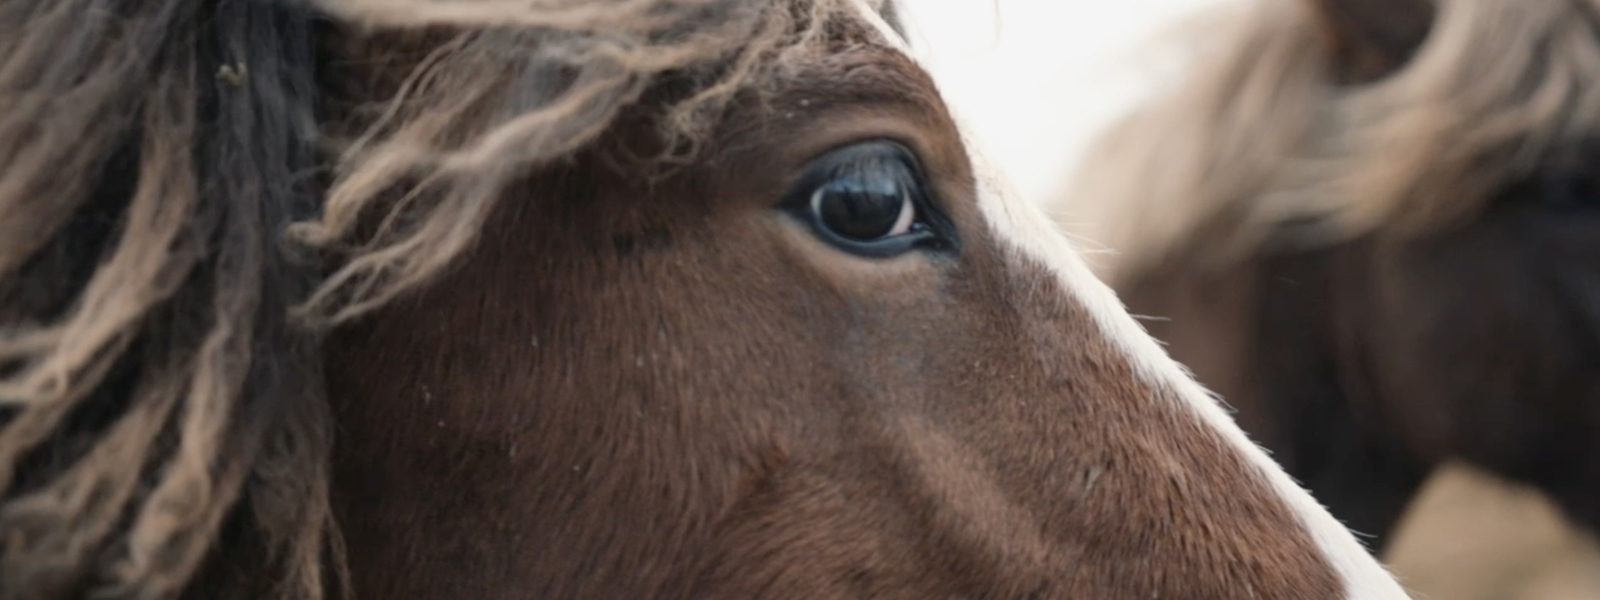 Tonally divergent, dual activations deliver a singular message to save wild horses.